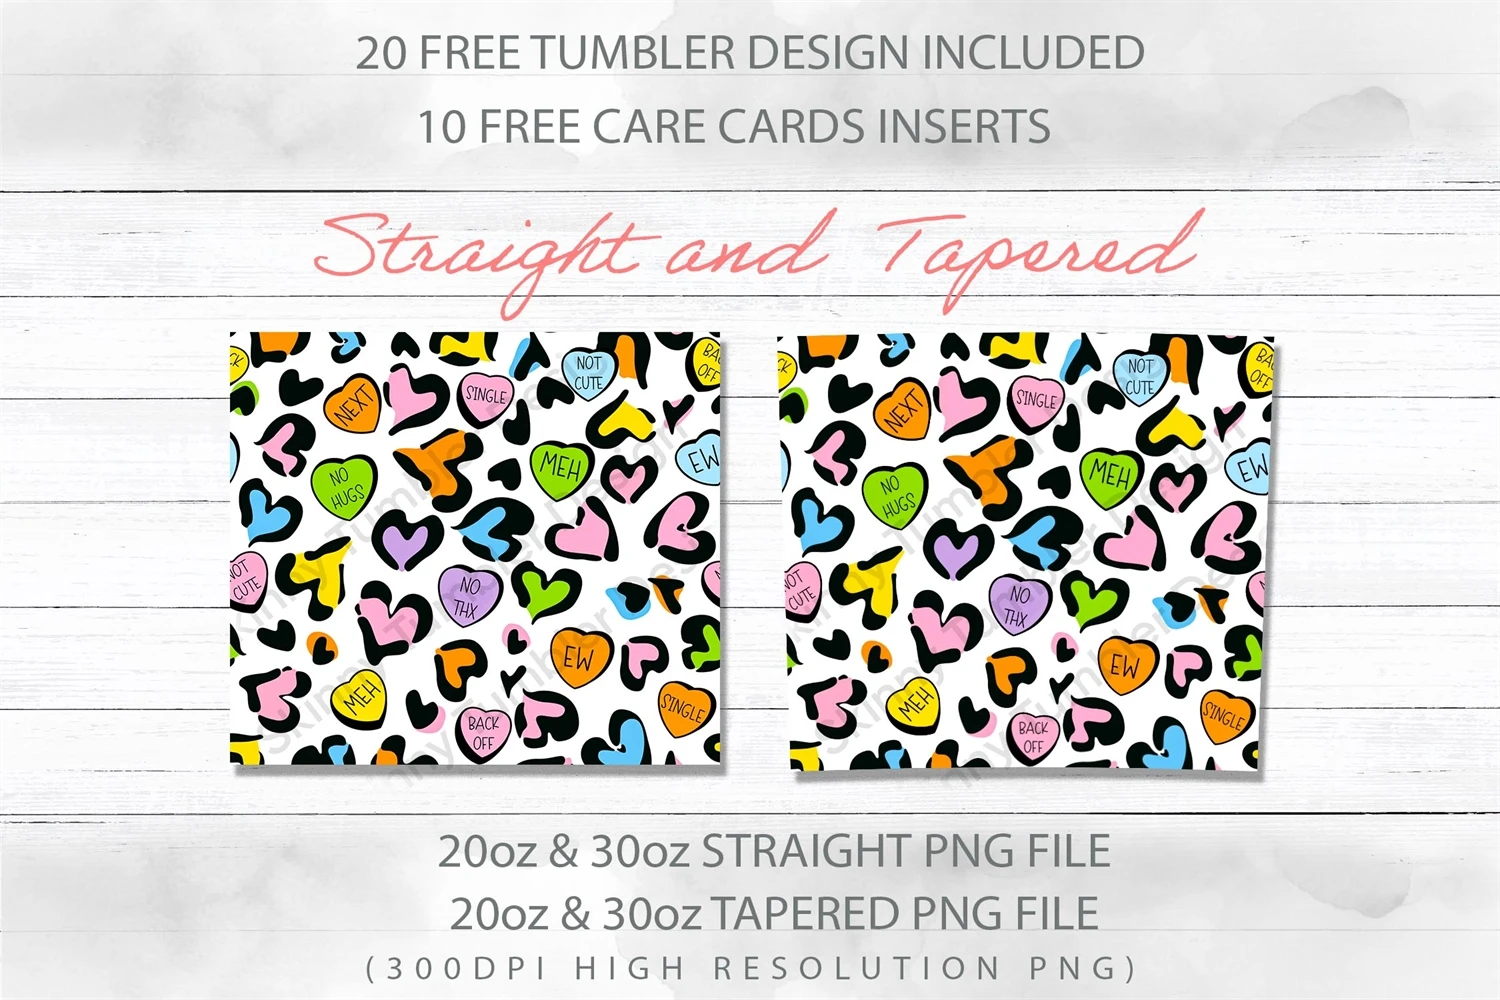 Tumbler Care Cards – That Glitter Supplier